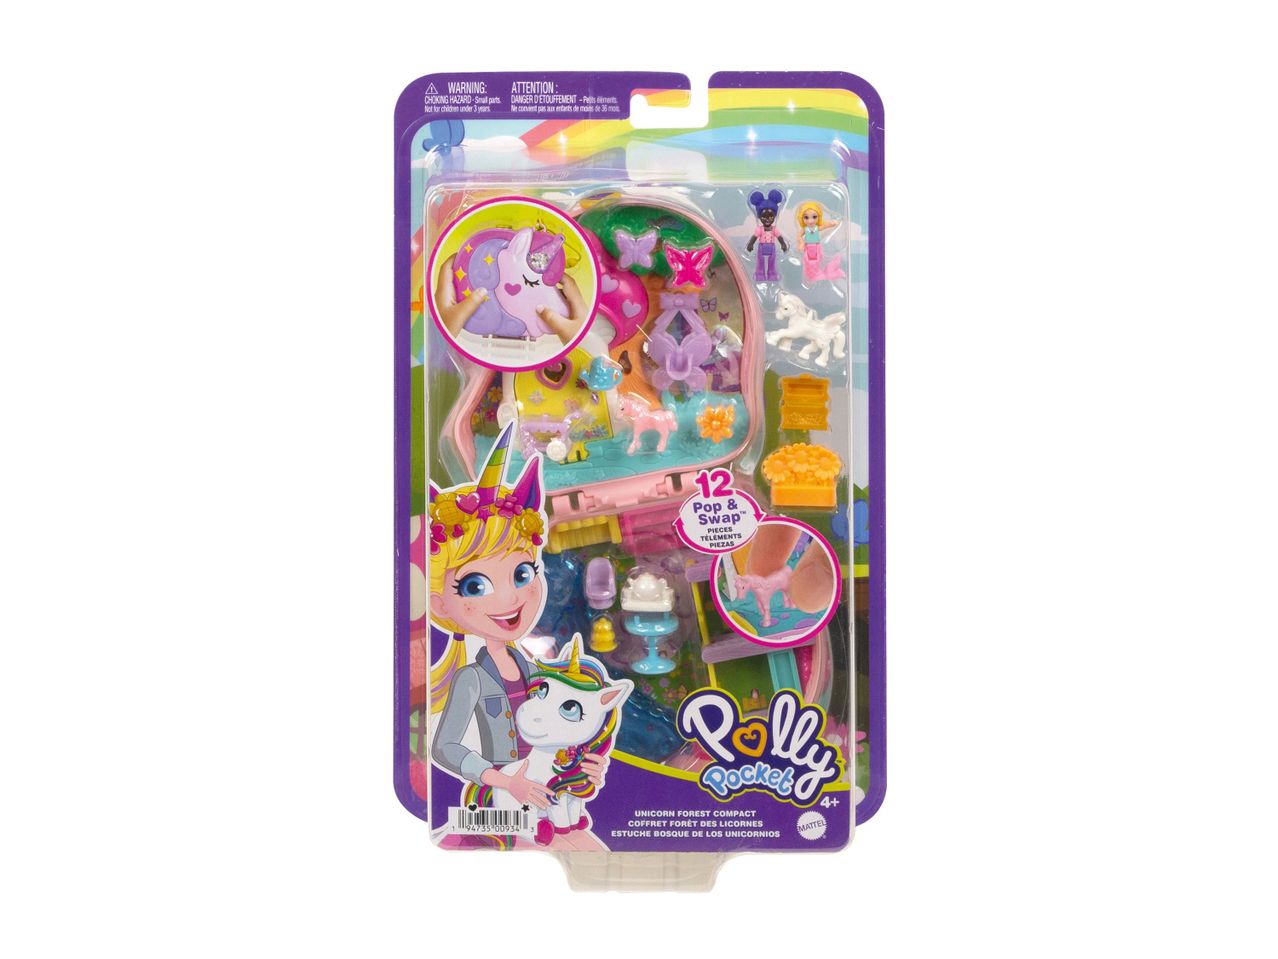 Go to full screen view: Polly Pocket Compact - Image 5